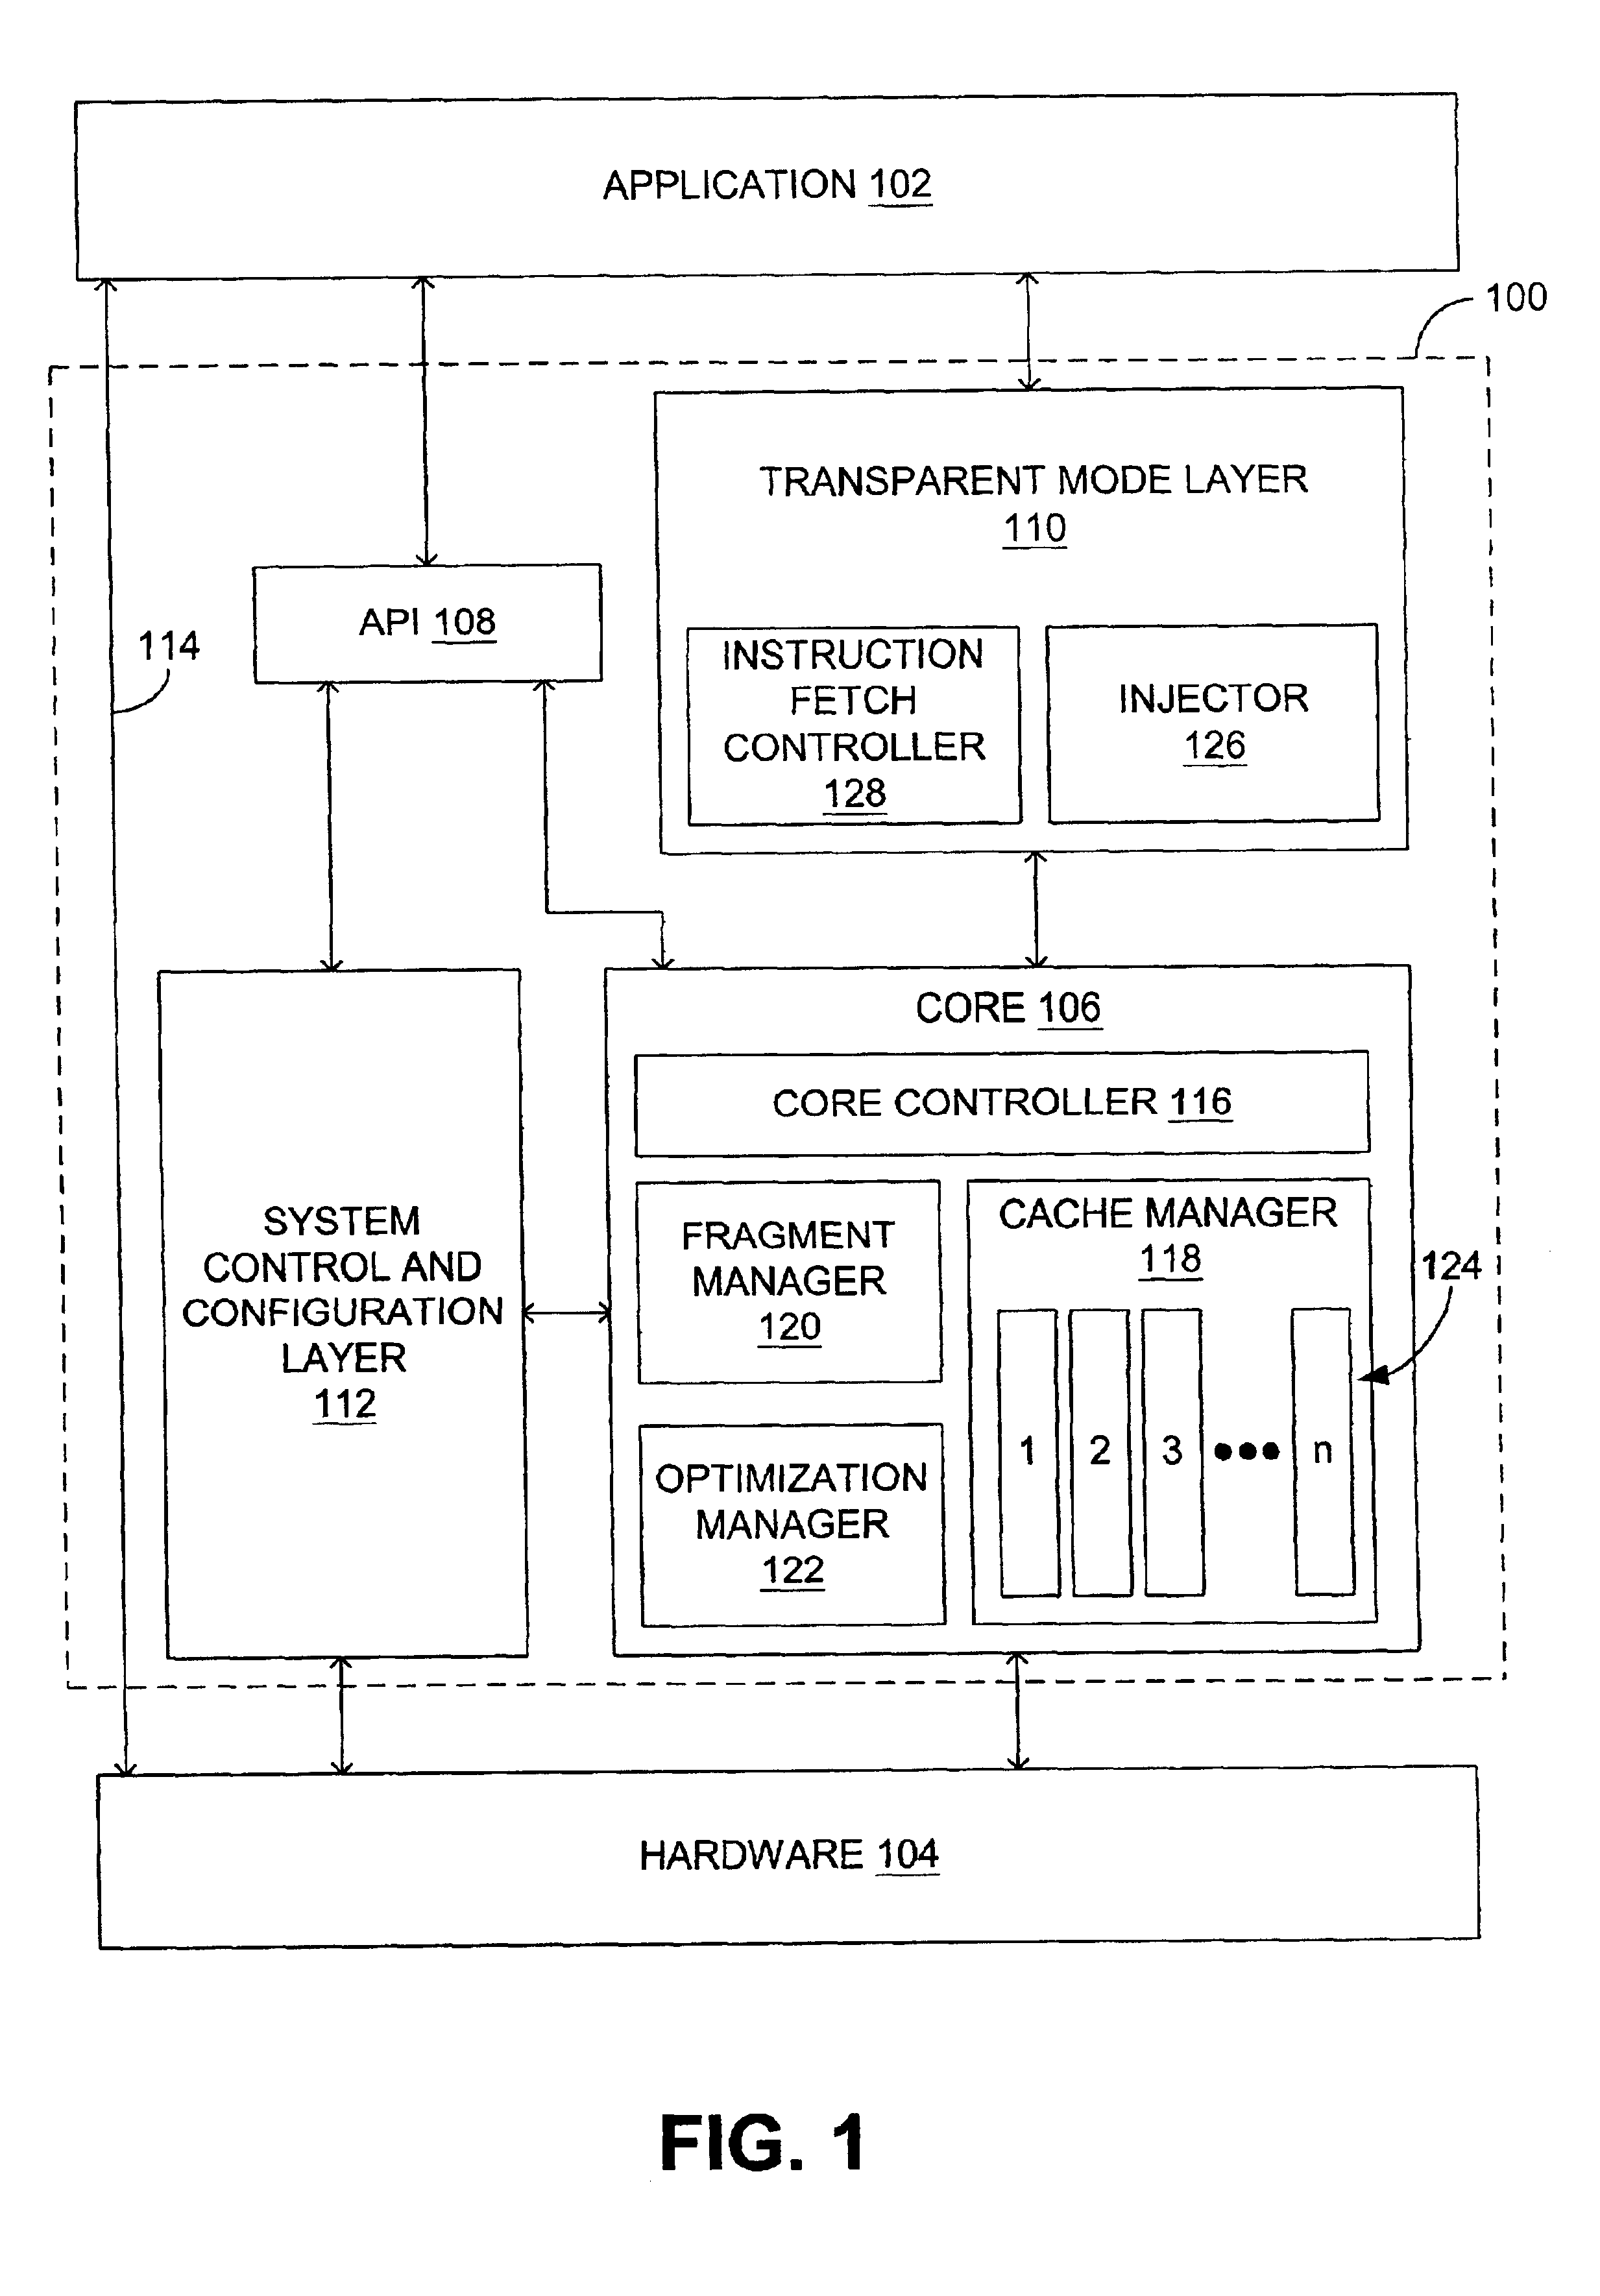 Dynamic execution layer interface for replacing instructions requiring unavailable hardware functionality with patch code and caching